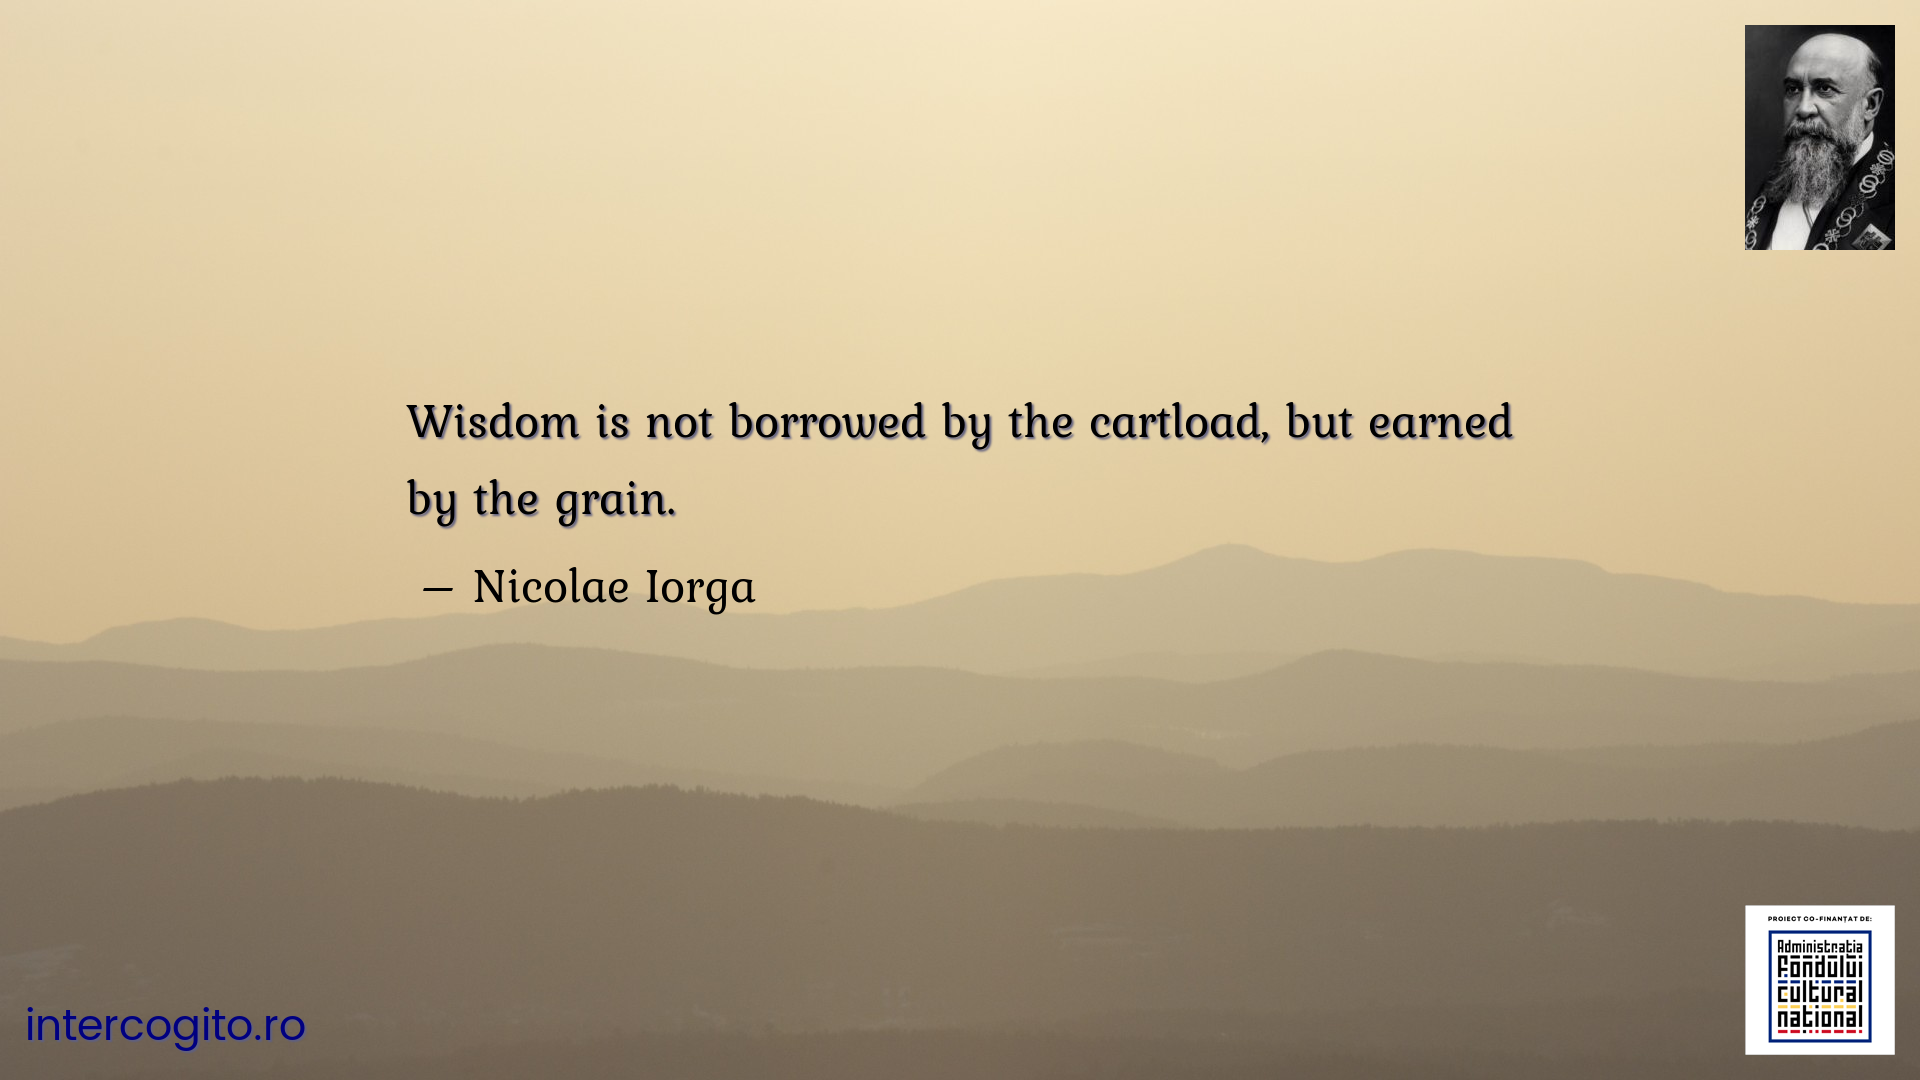 Wisdom is not borrowed by the cartload, but earned by the grain.